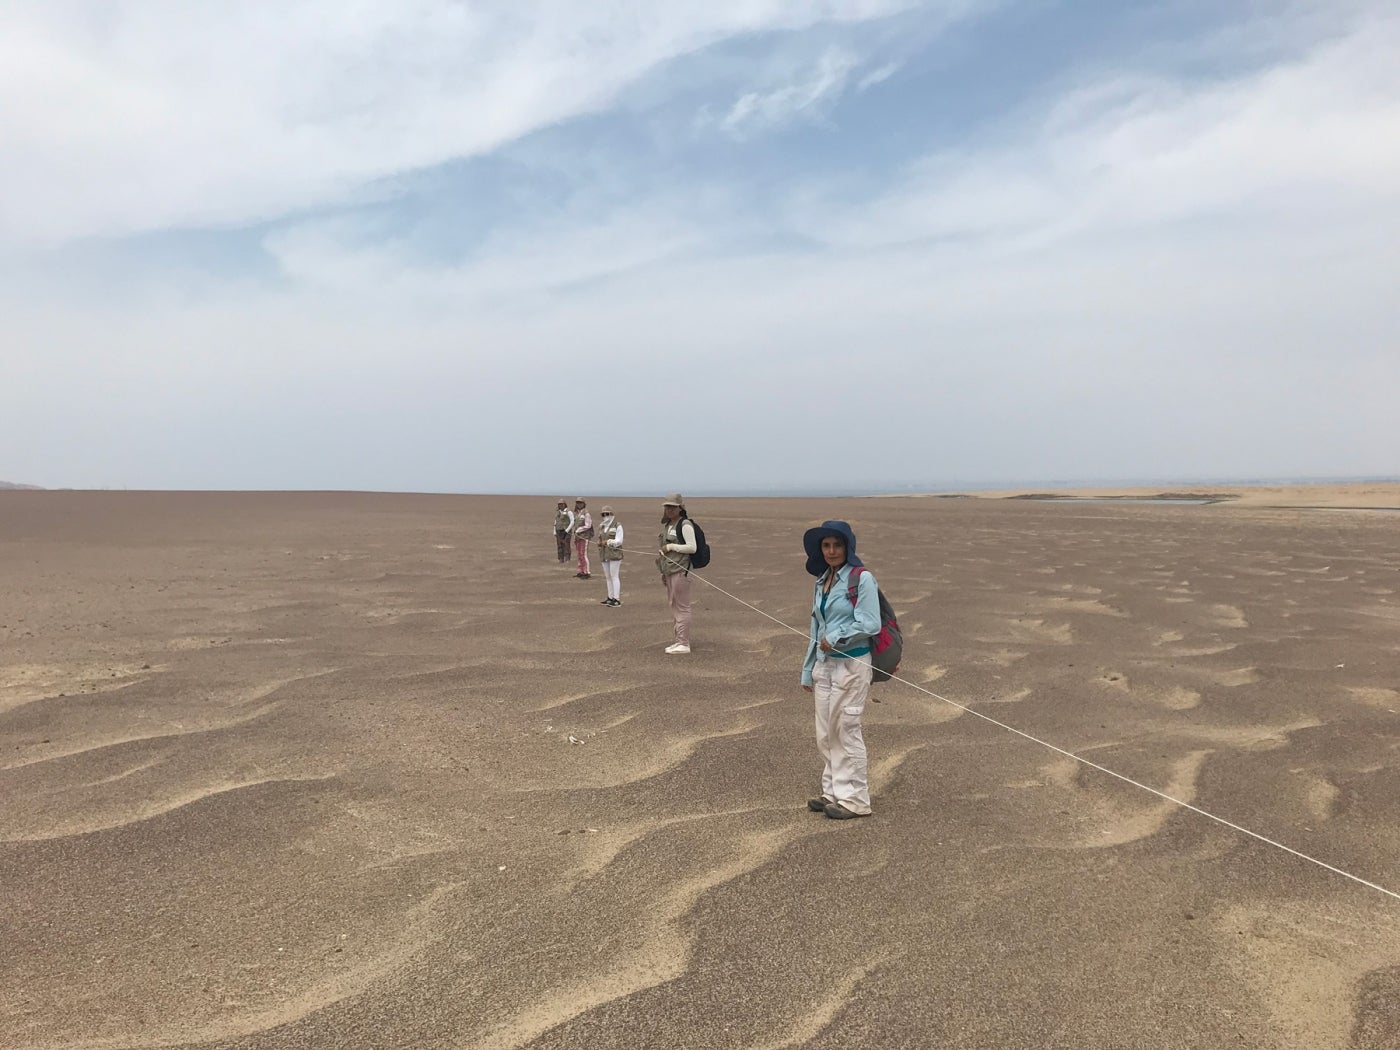 A team of researchers in the sandy, open desert landscape of Peru's Paracas National Reserve. The researchers are spread out and hold onto a rope stretched between them